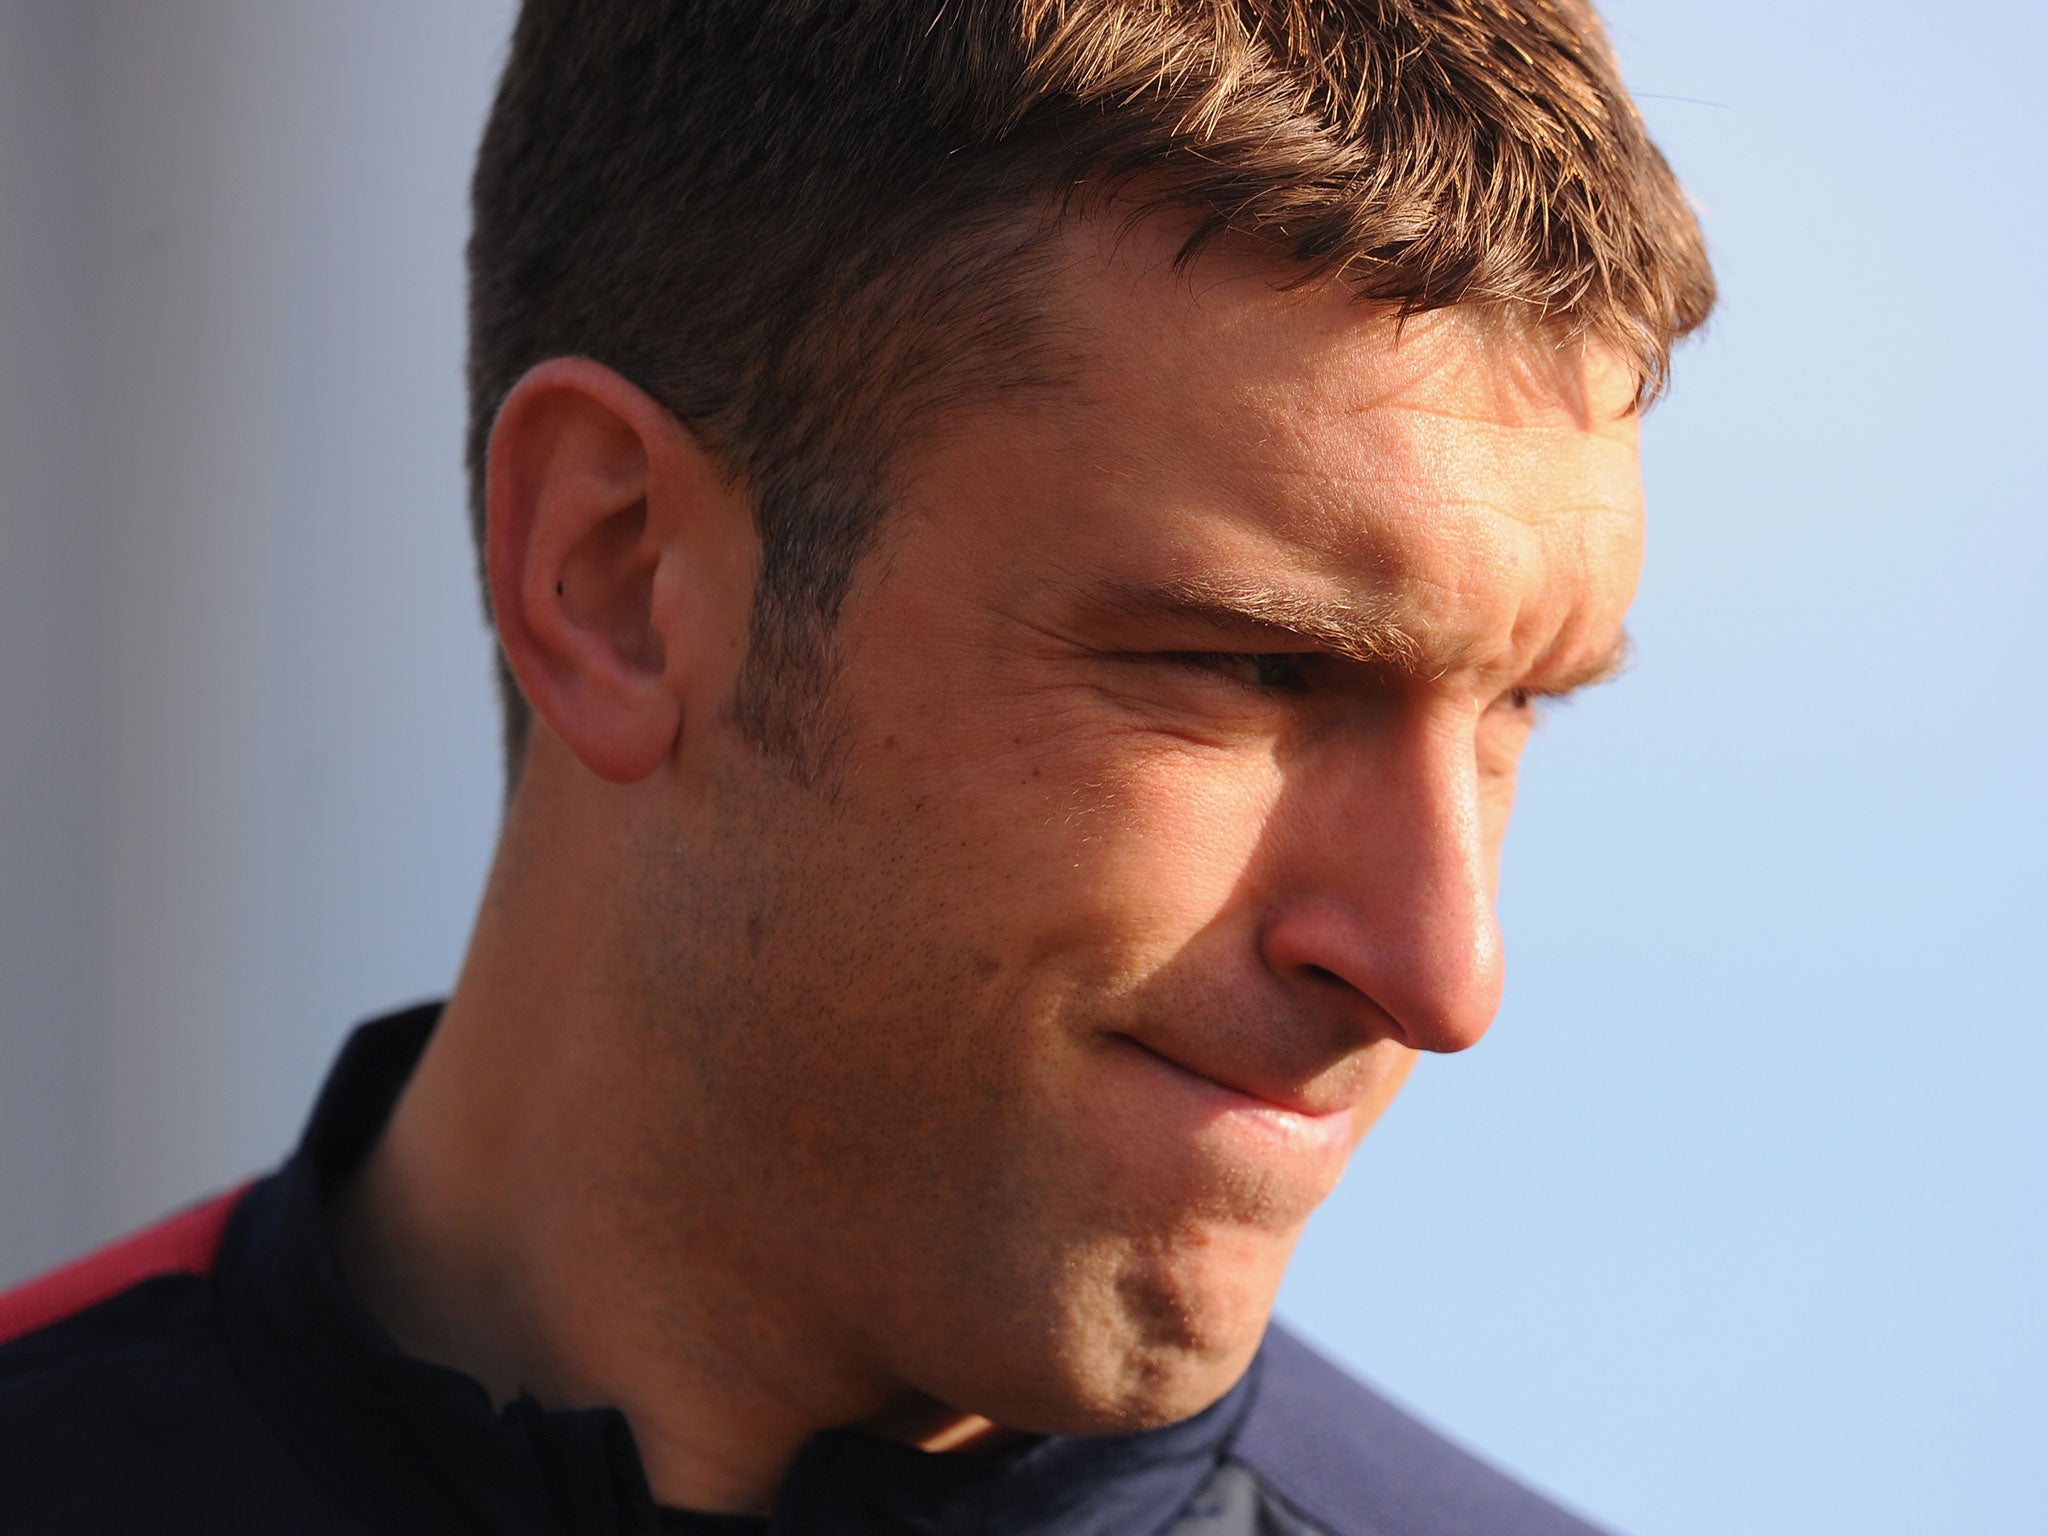 Roy Hodgson has confirmed that Rickie Lambert will miss Friday's match against Chile through injury